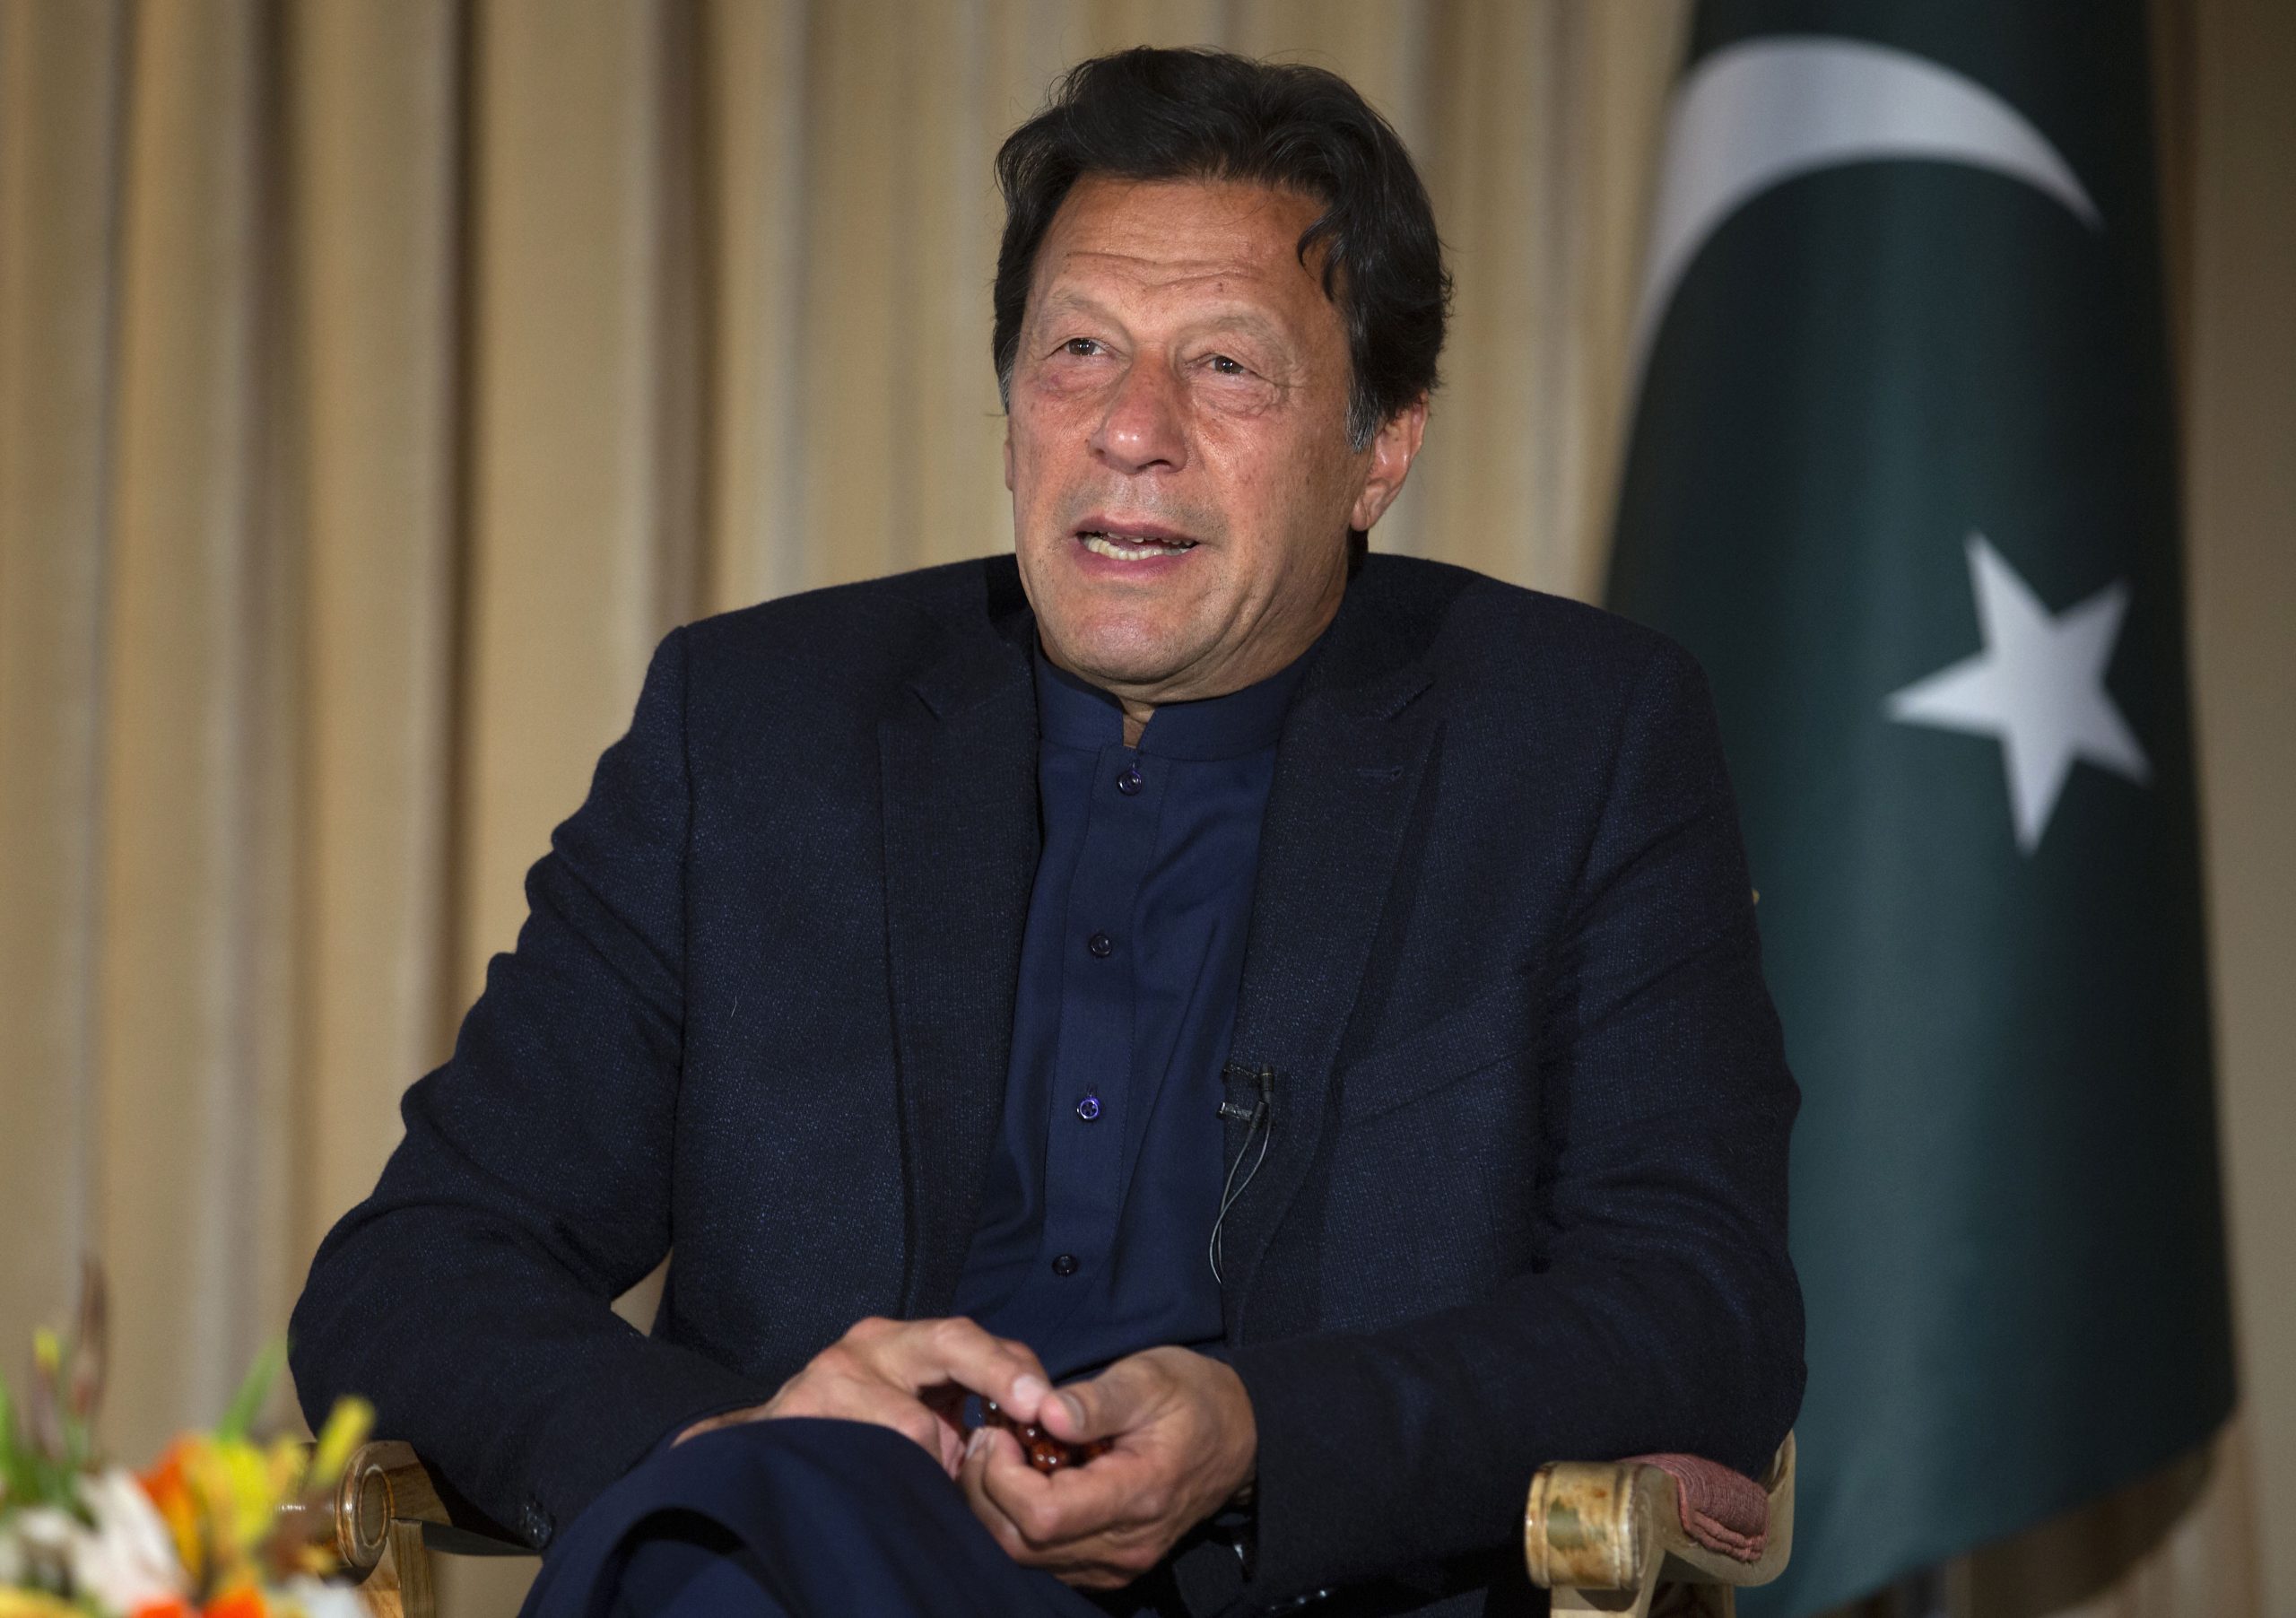 Pakistan PM Imran Khan links women’s clothes to rise in sexual violence